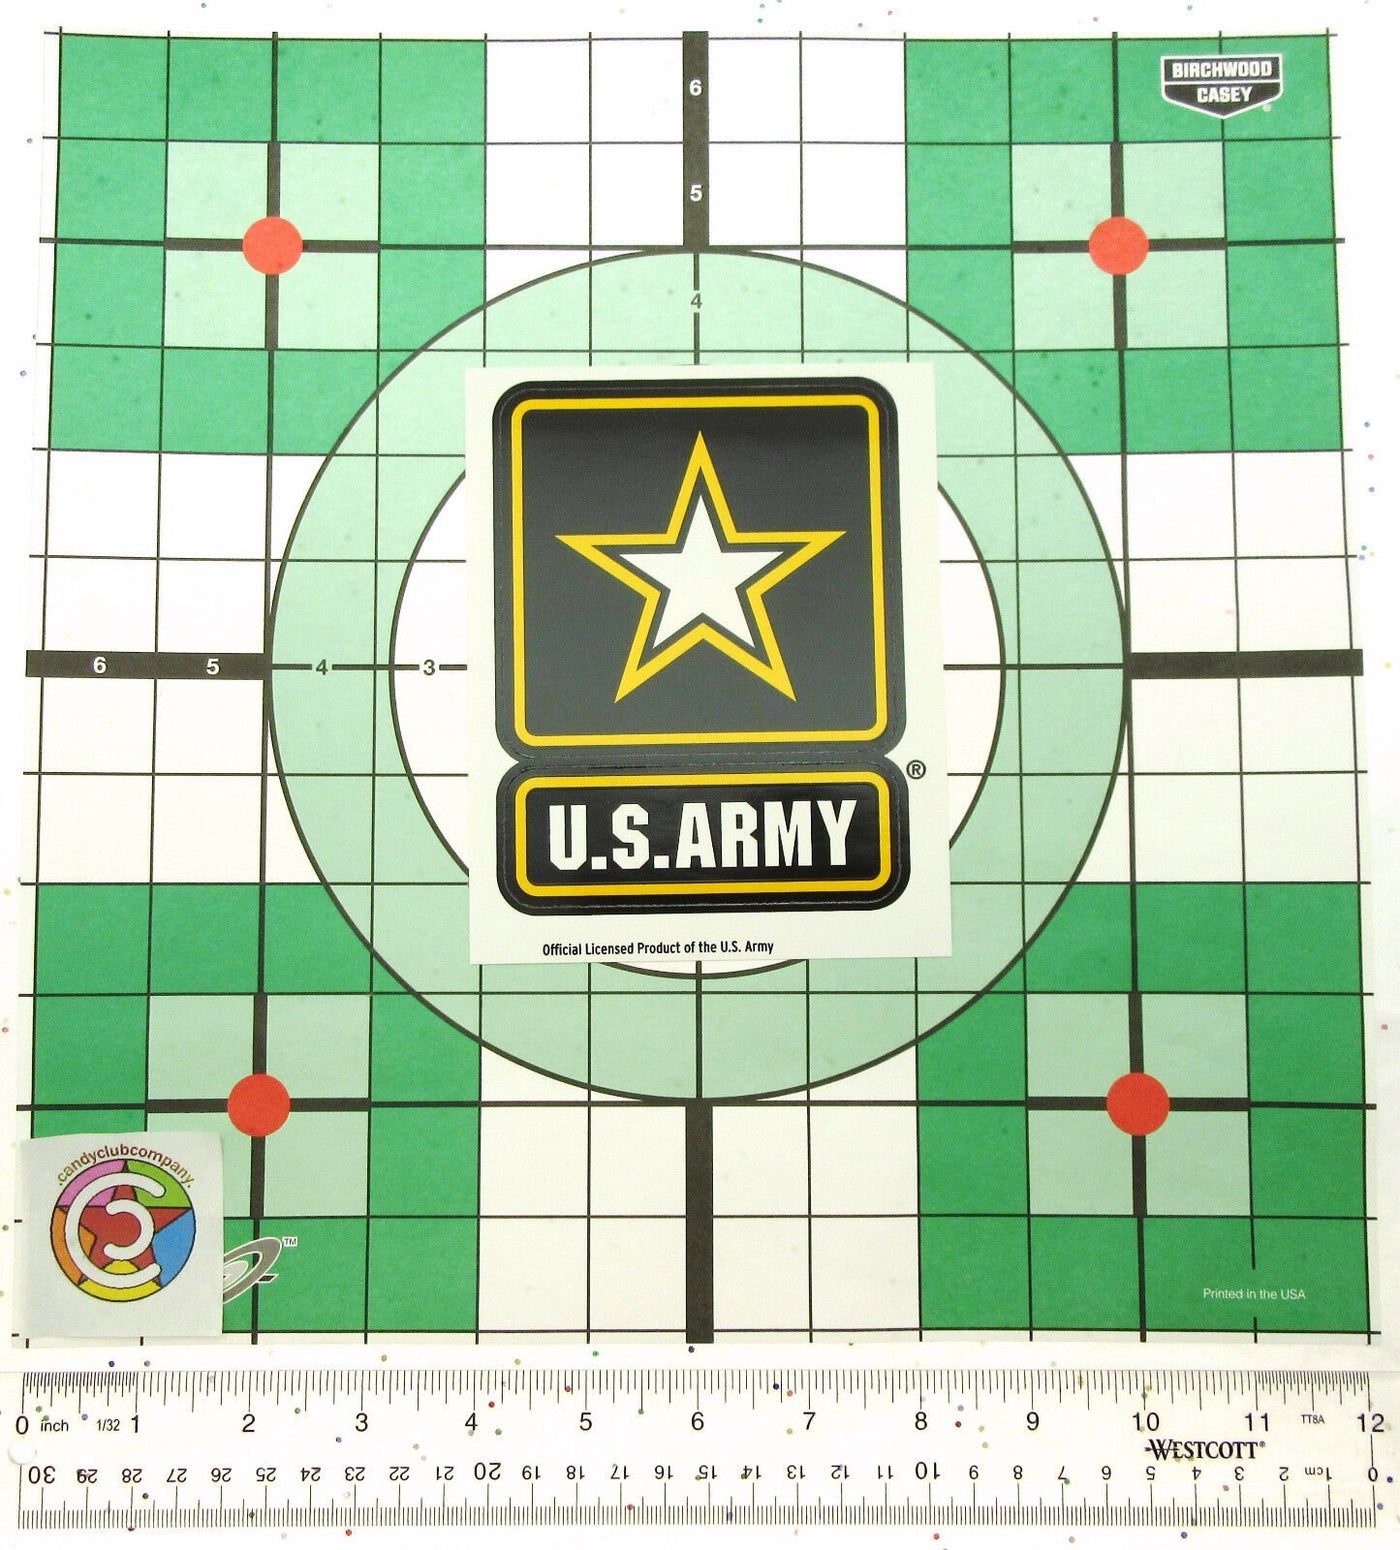 U.S. Army Decal ~ For Cars or Trucks ~ Military Exterior Decal